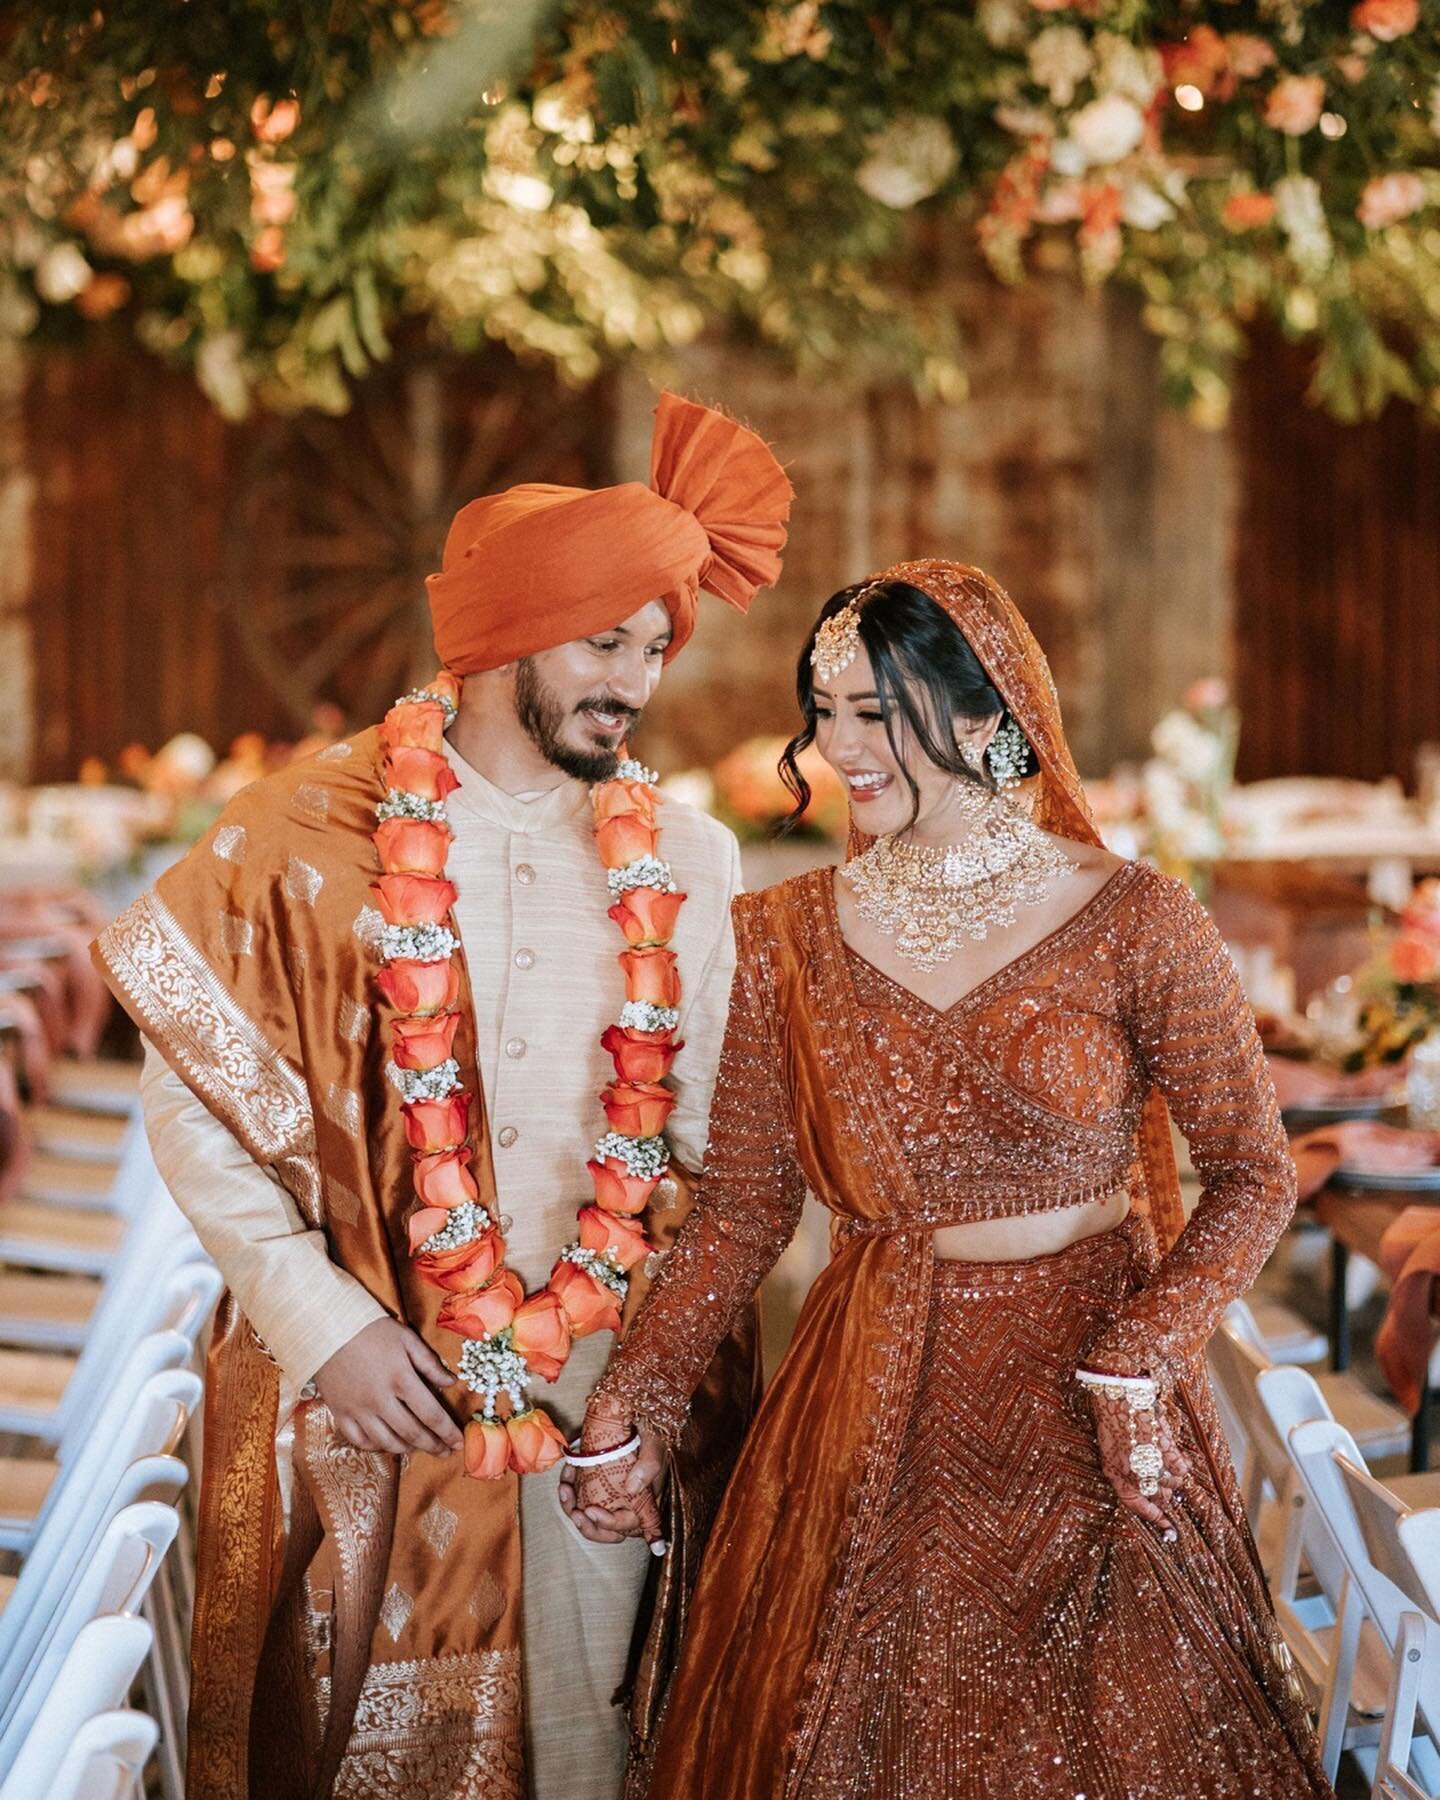 Absolutely loved this reception decor &amp; styling by @_isntitlovelyevents for Dea &amp; Saty&rsquo;s reception 😍
.
HMUA: @fareha_bridal_studio 
Venue: @adamspeakcountryestate 
DJ @jskmusic
Bridal outfit @adityaandmohit 
Jewellery @infinity_collect